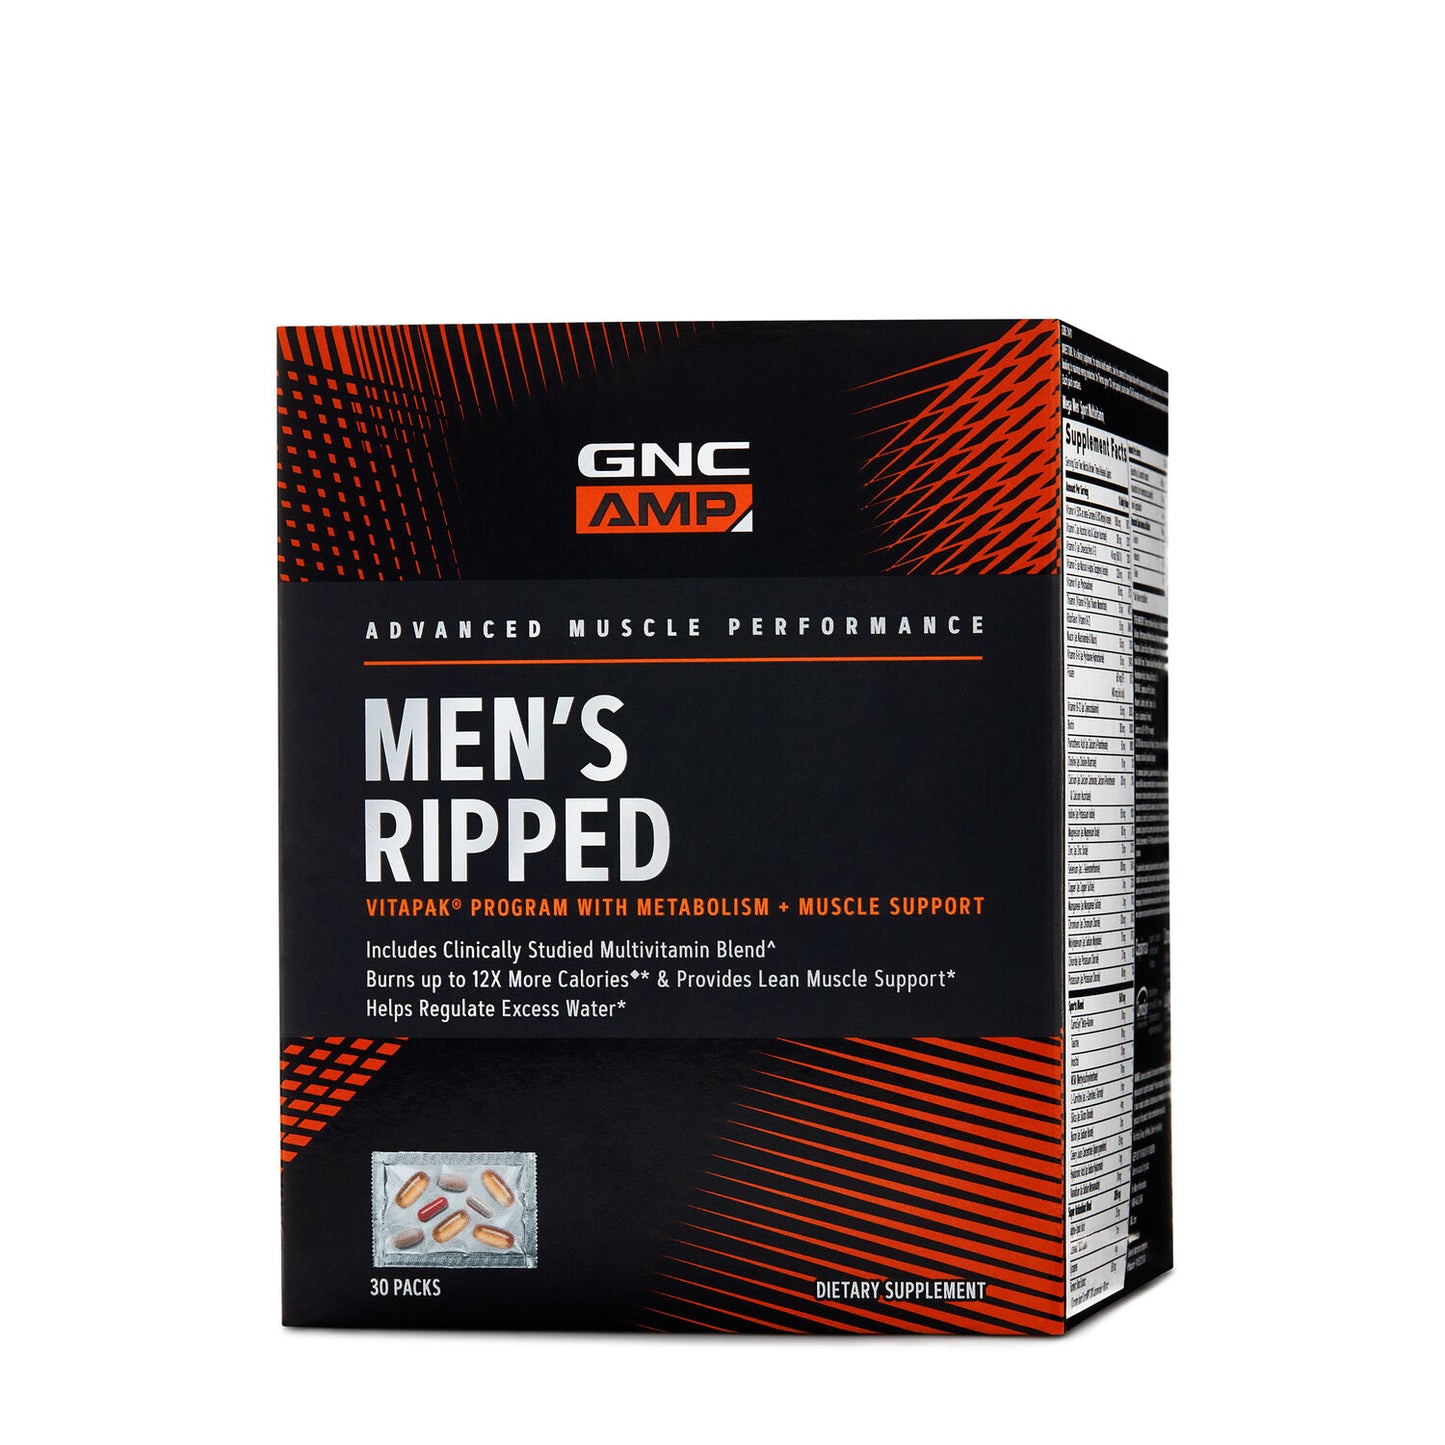 GNC AMP Men's Ripped Vitapak® Program With Metabolism + Muscle Support - 30 Vitapaks